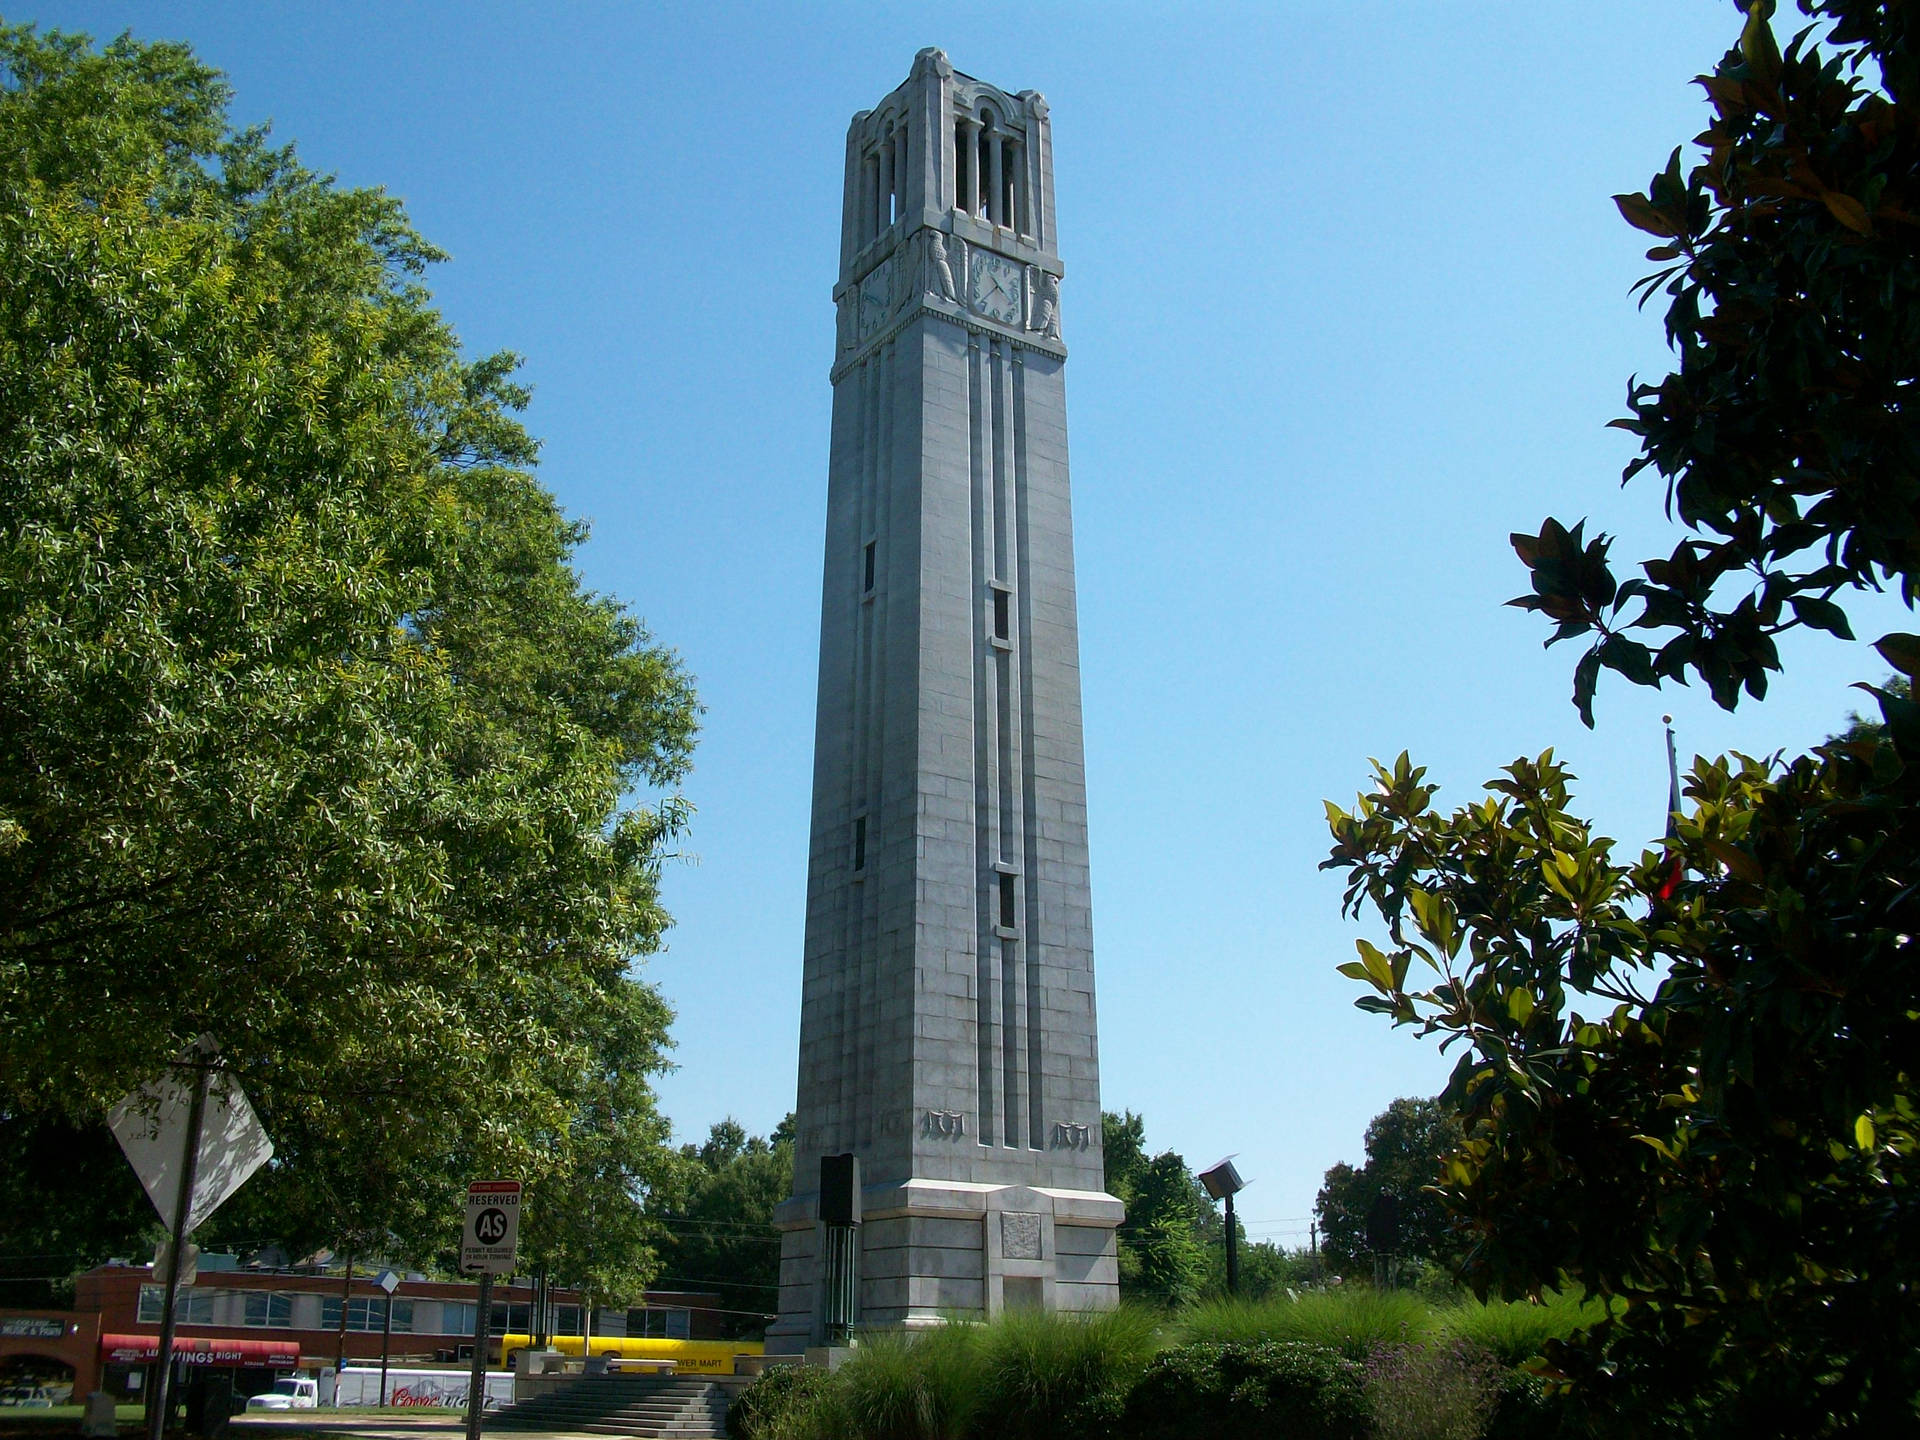 Caption: Majestic view of the North Carolina State University's Memorial Bell Tower Wallpaper